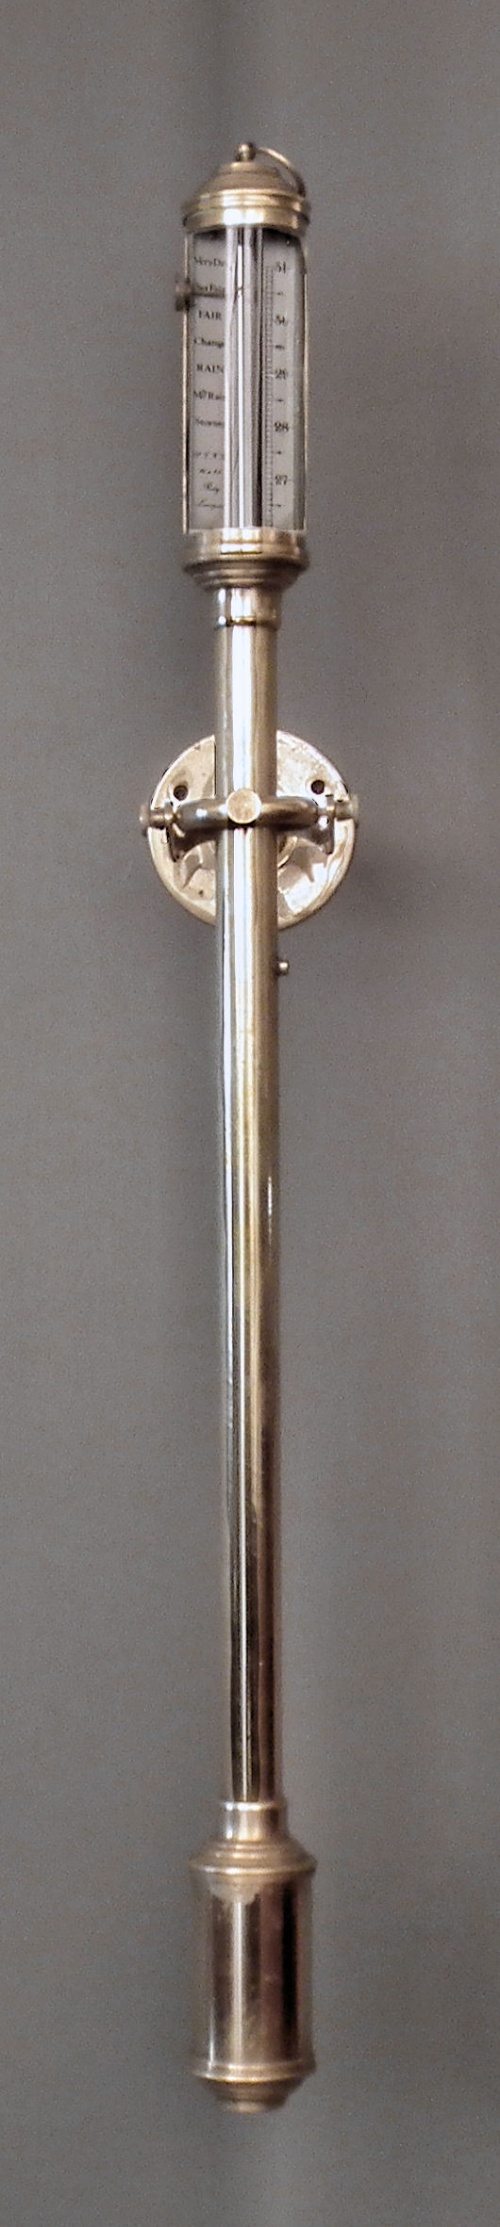 A modern lacquered brass marine barometer